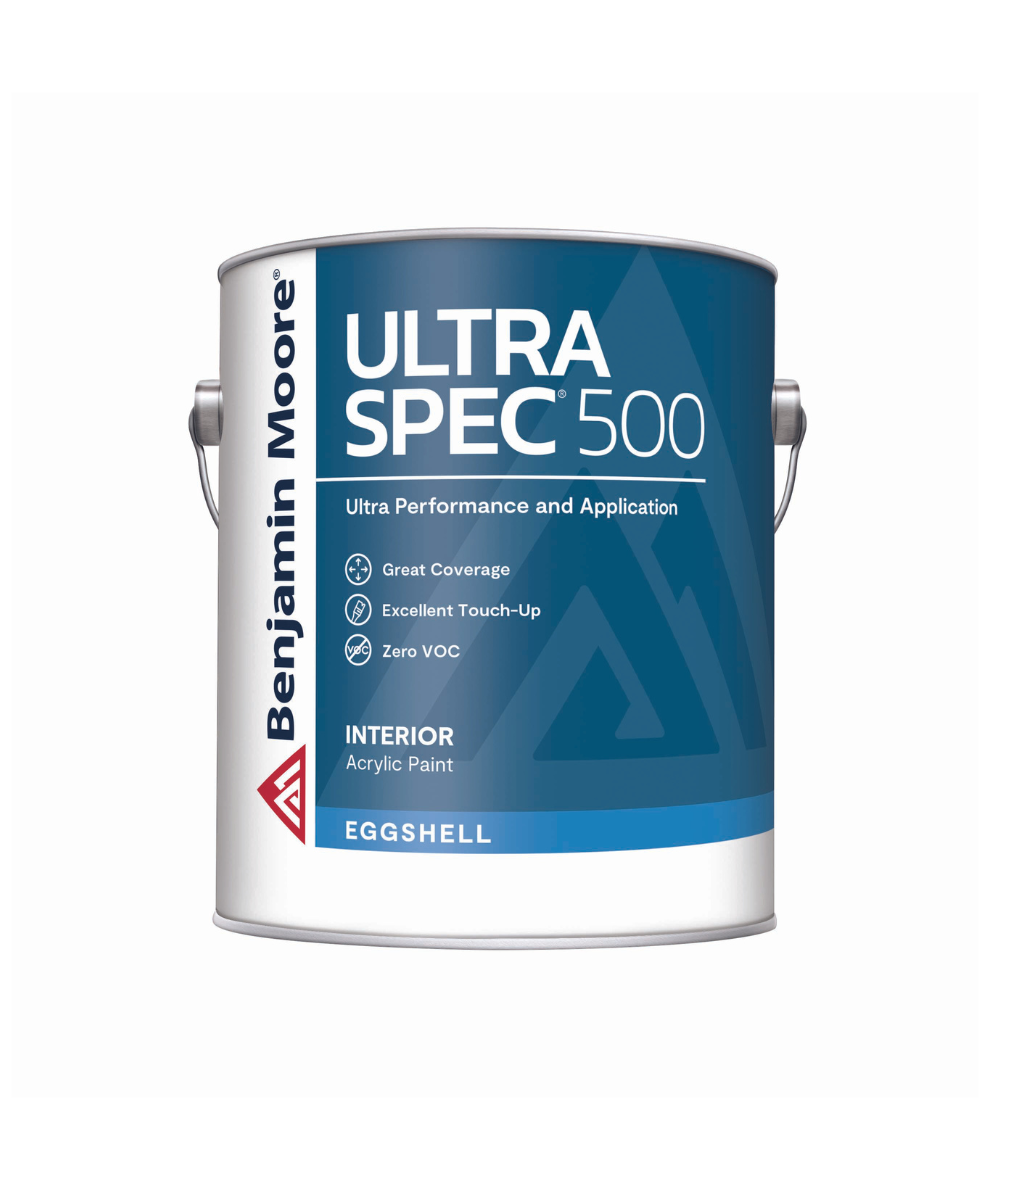 Benjamin Moore ultra spec 500 interior paint in eggshell, available at Creative Paint in San Francisco, South Bay & East Bay.